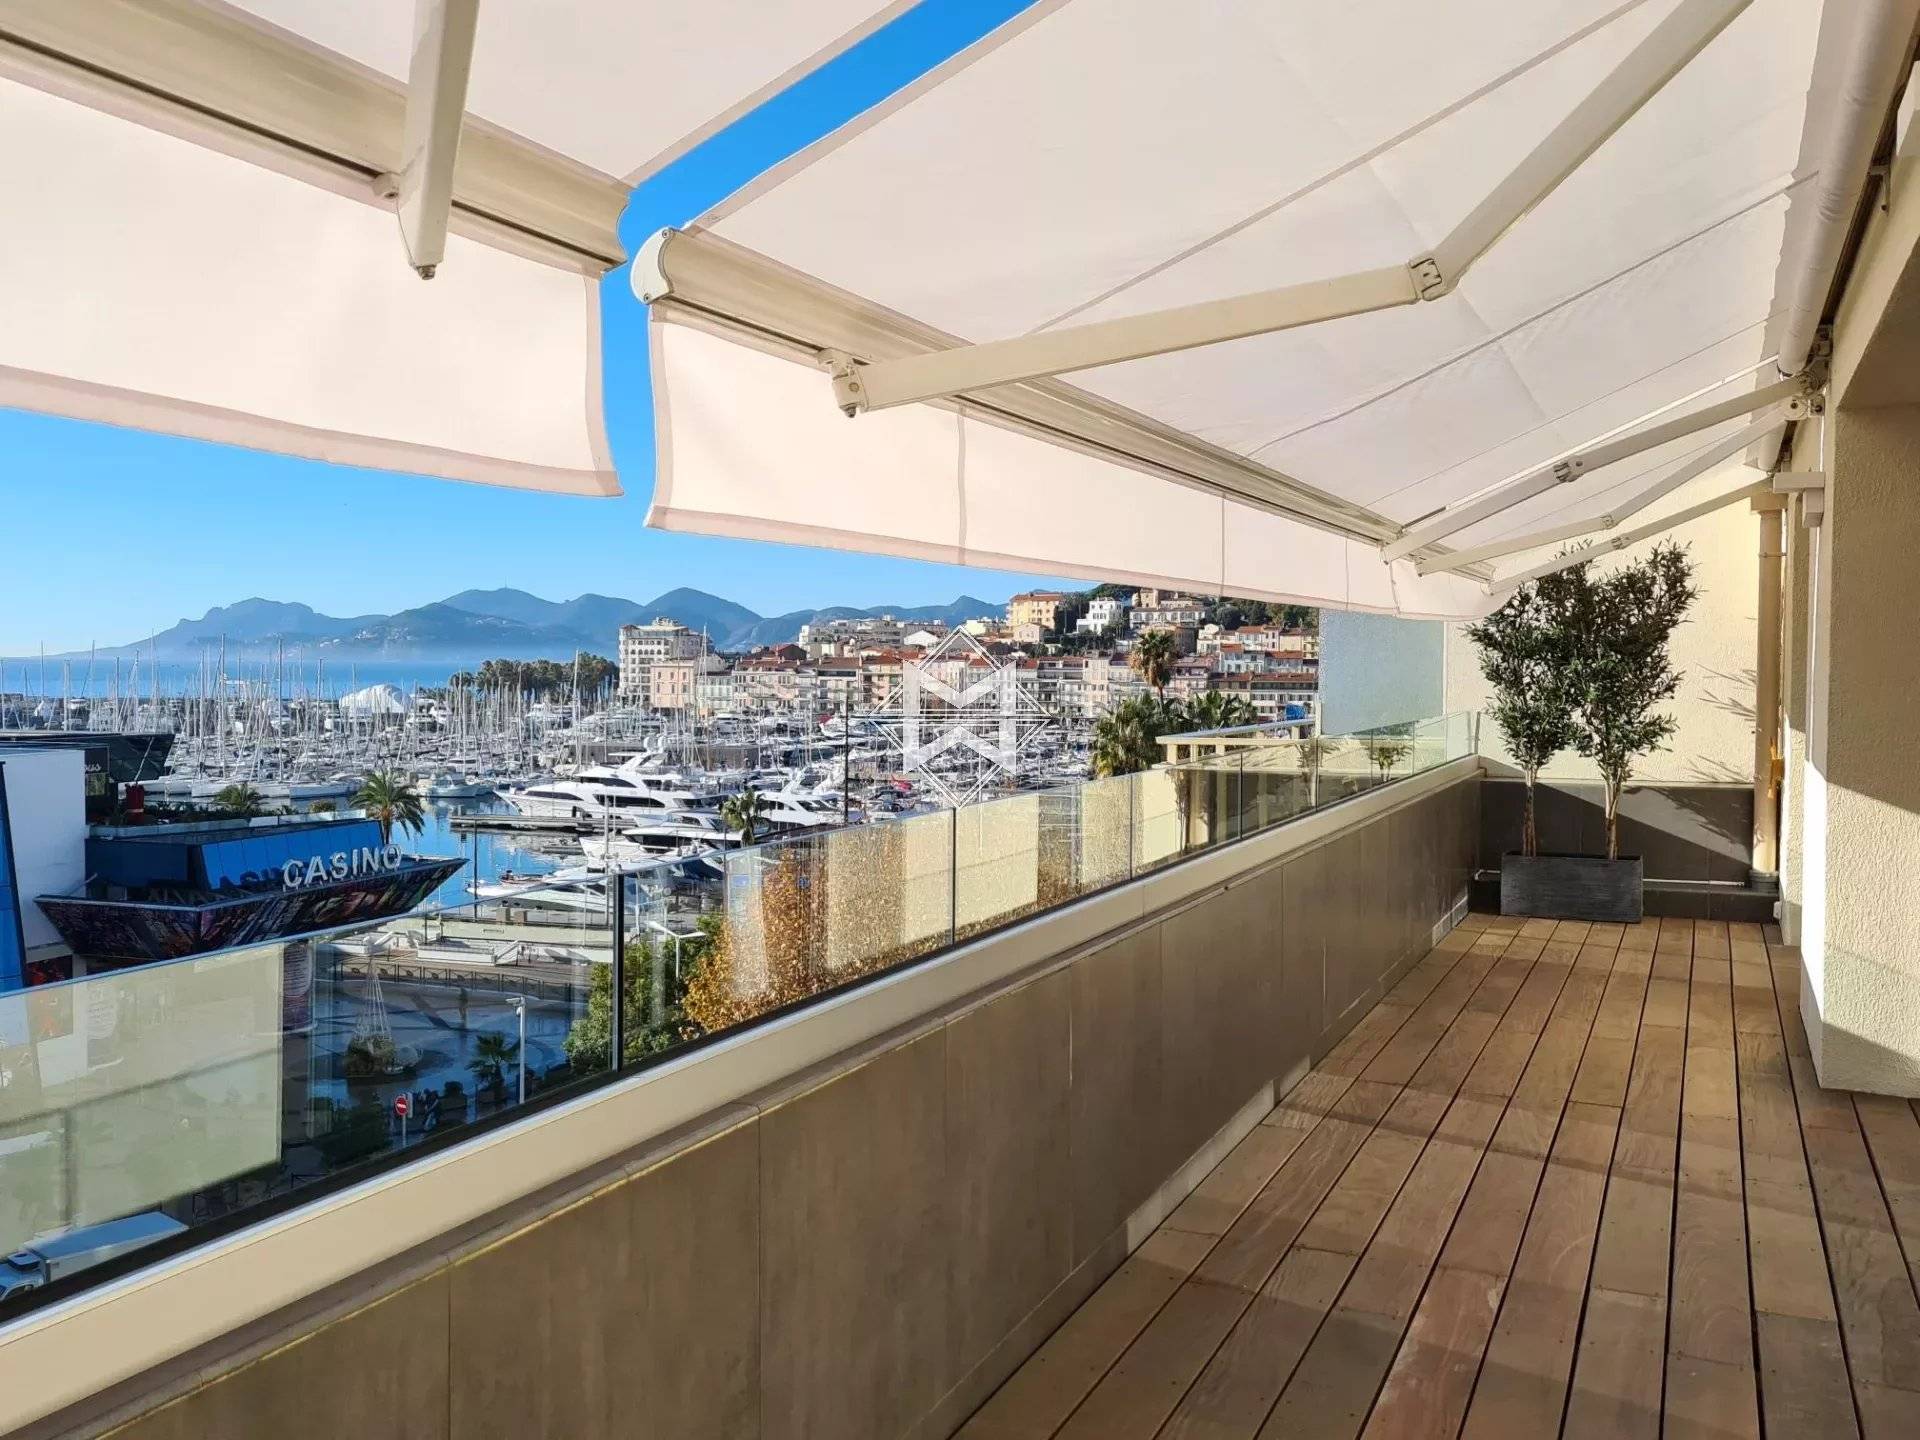 4 room Penthouse in front of the Palais des Festivals